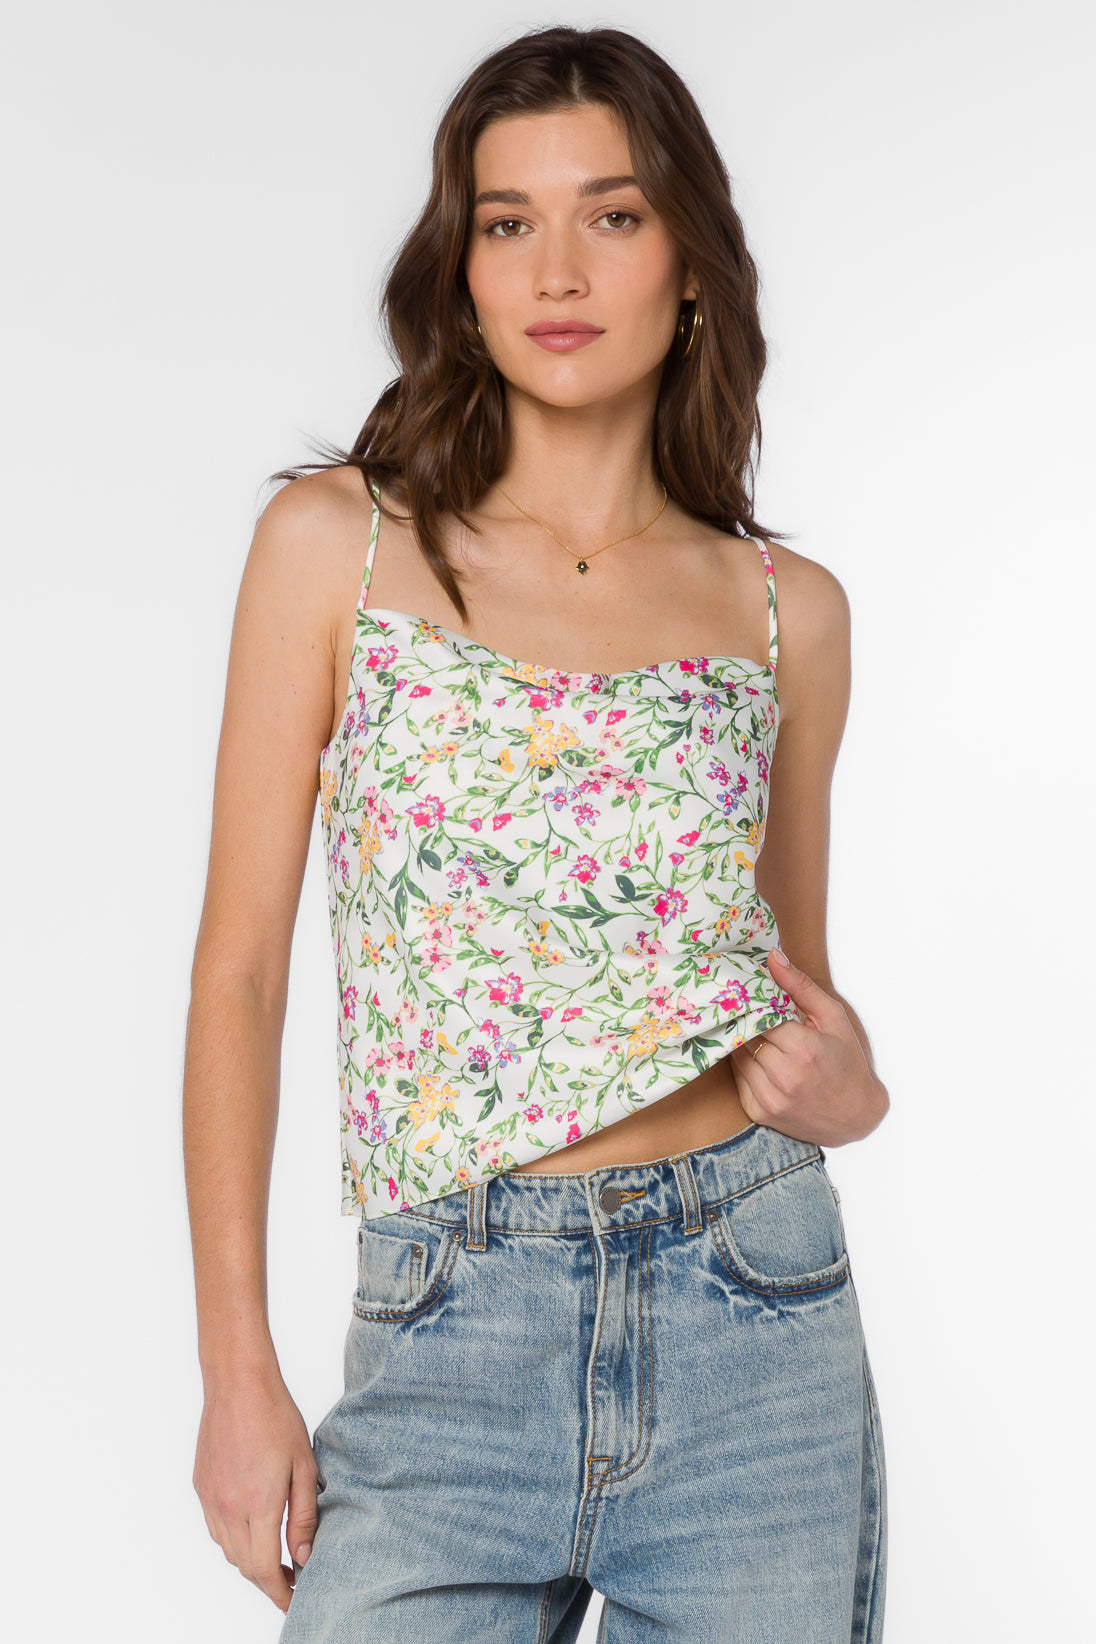 Wallace Spring Ivy Top - Tops - Velvet Heart Clothing